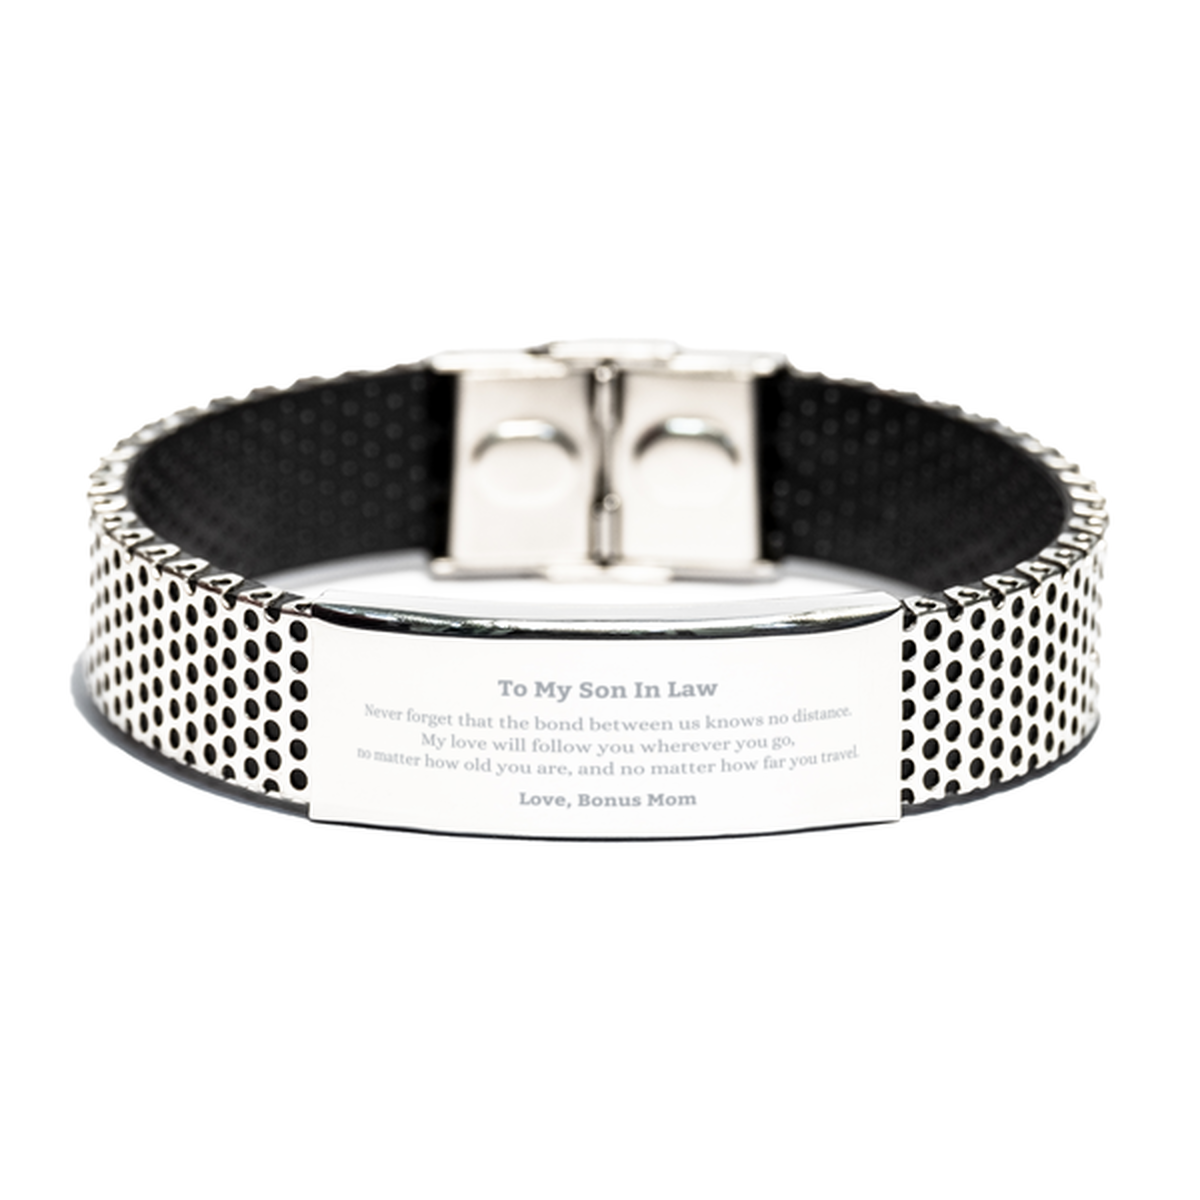 Son In Law Birthday Gifts from Bonus Mom, Adjustable Stainless Steel Bracelet for Son In Law Christmas Graduation Unique Gifts Son In Law Never forget that the bond between us knows no distance. Love, Bonus Mom